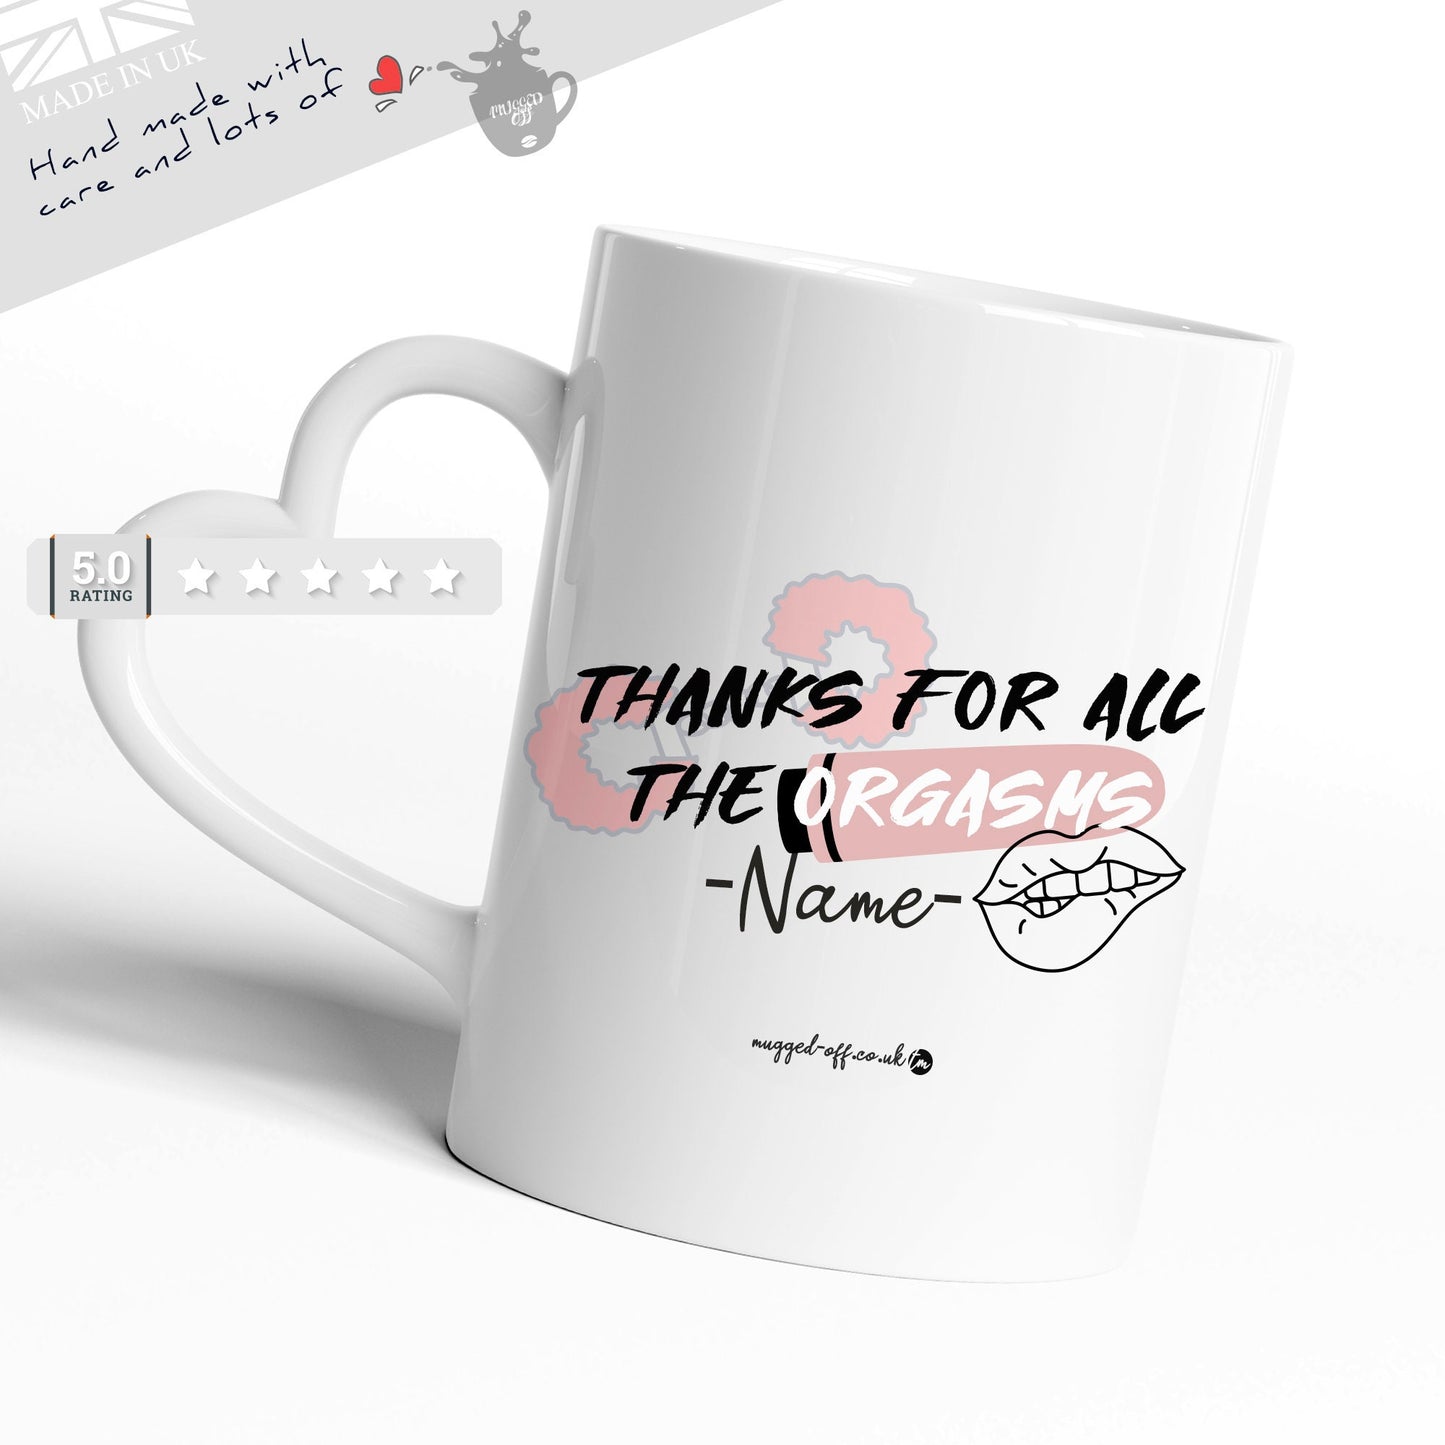 Anniversary Mug Gift for Valentines Day Gifts Mug Cups Tea Coffee Mugs - Thanks for all the Orgasms